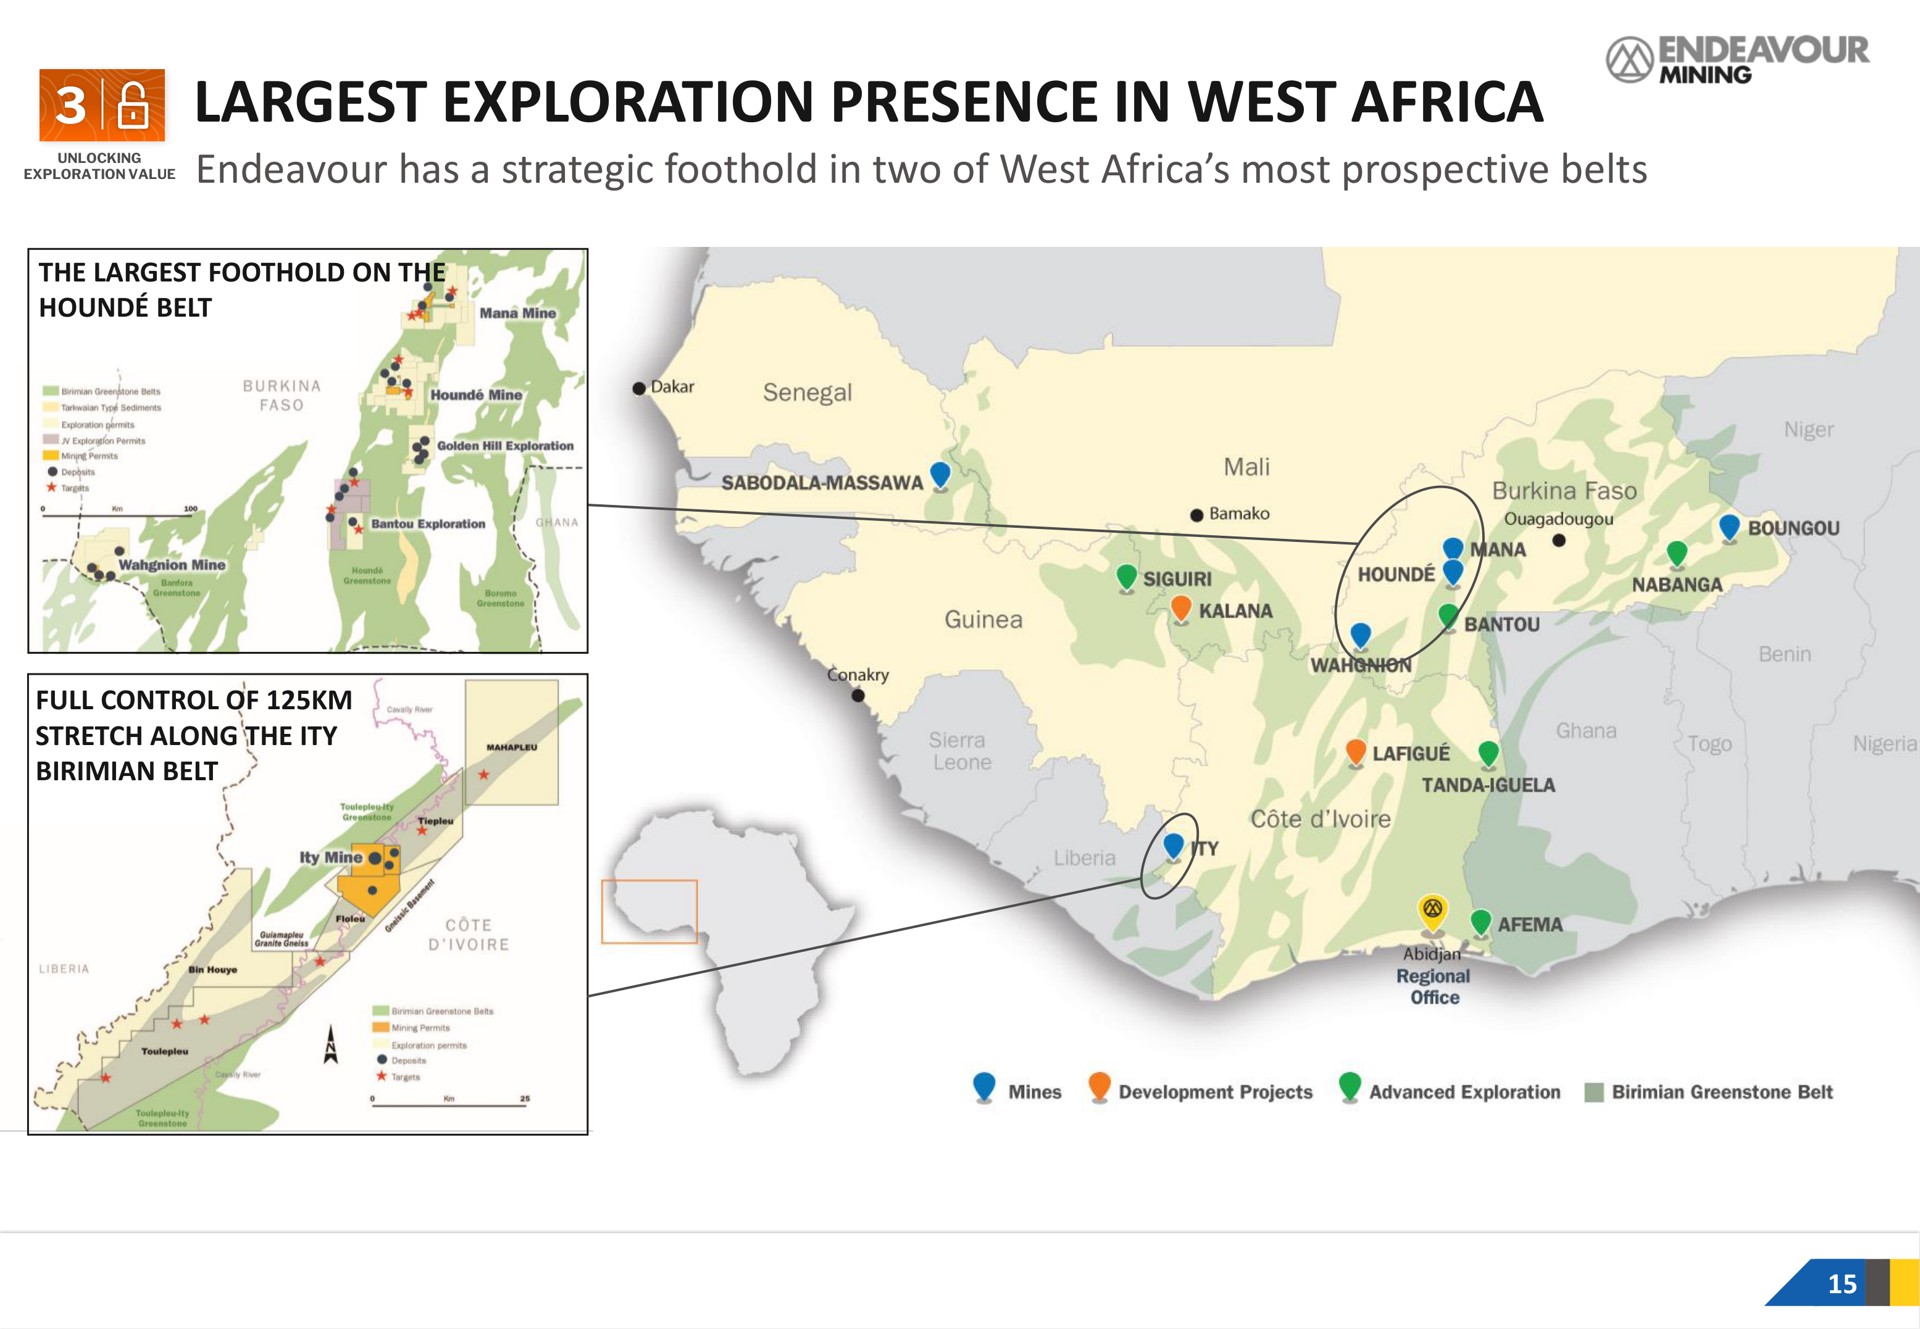 exploration presence in west has a strategic foothold in two of west most prospective belts | Endeavour Mining